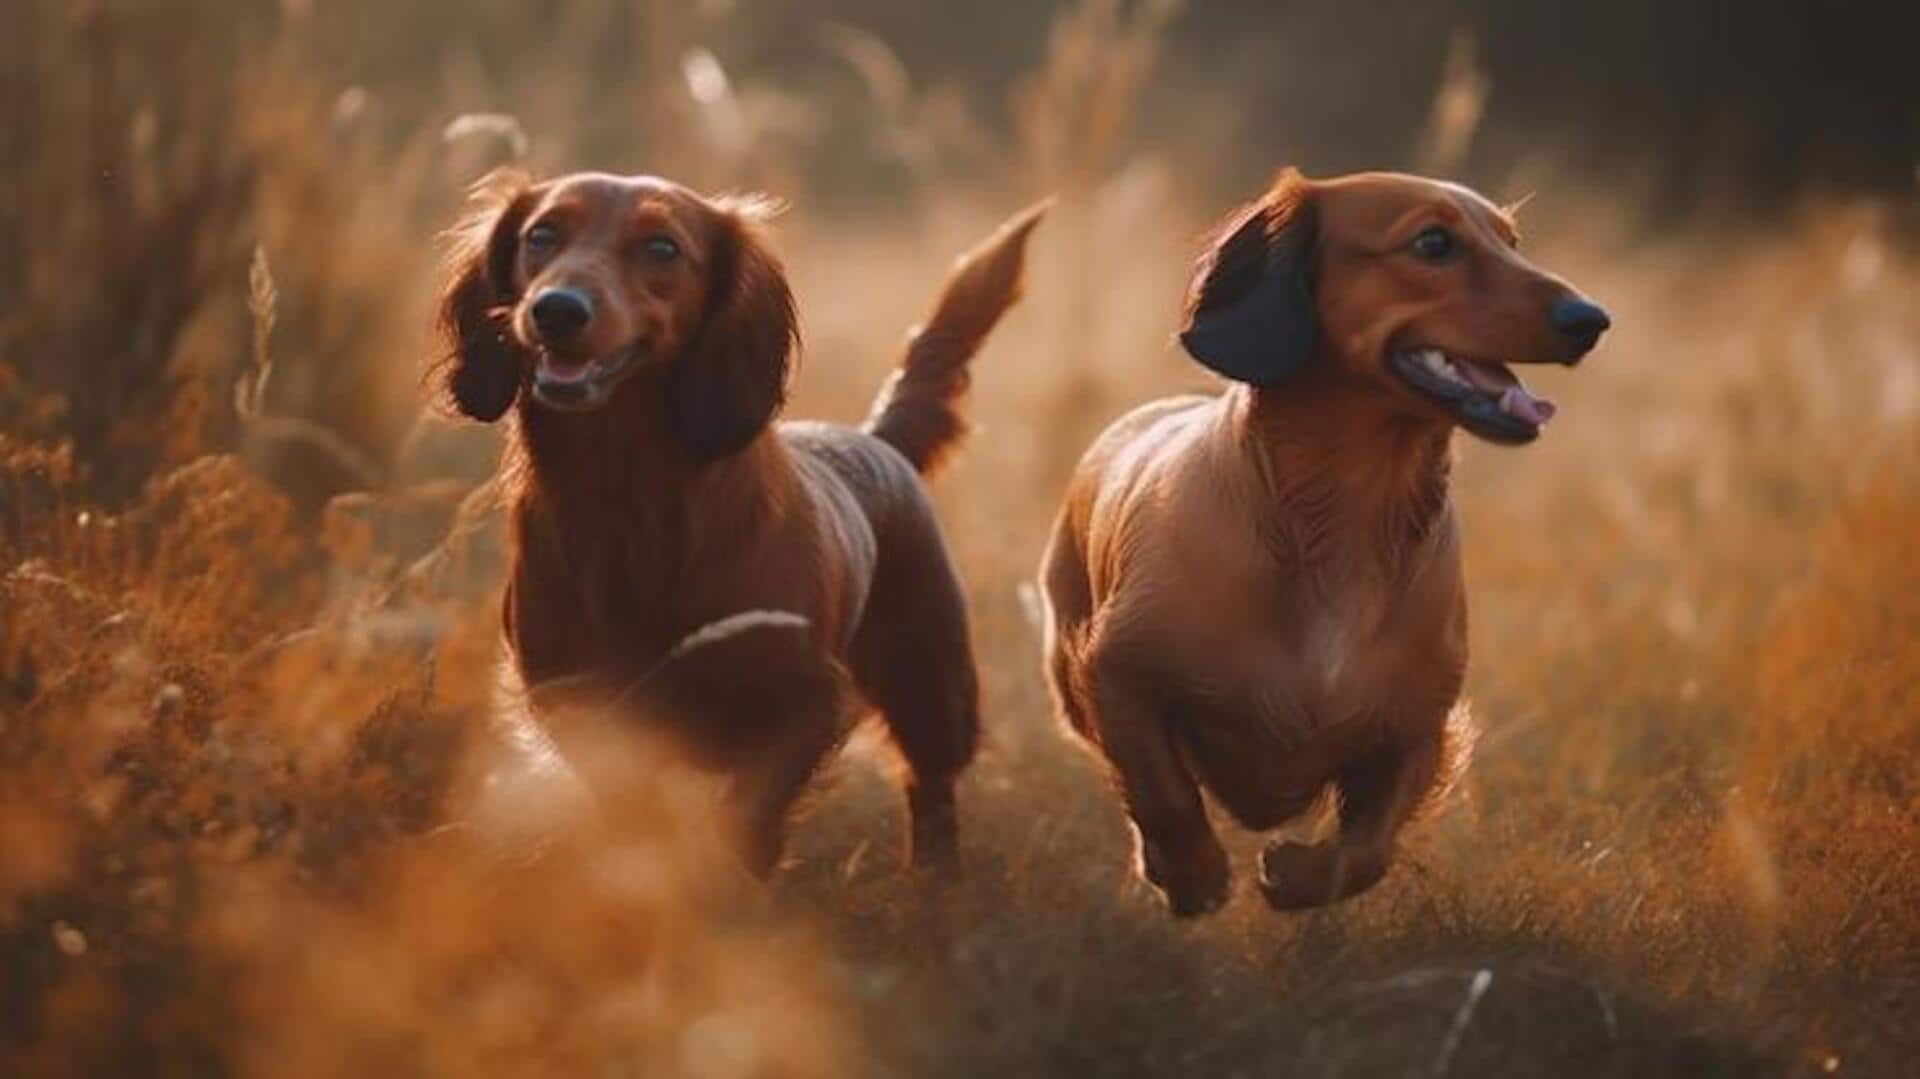 Dachshund nail trimming essentials their owners should know 